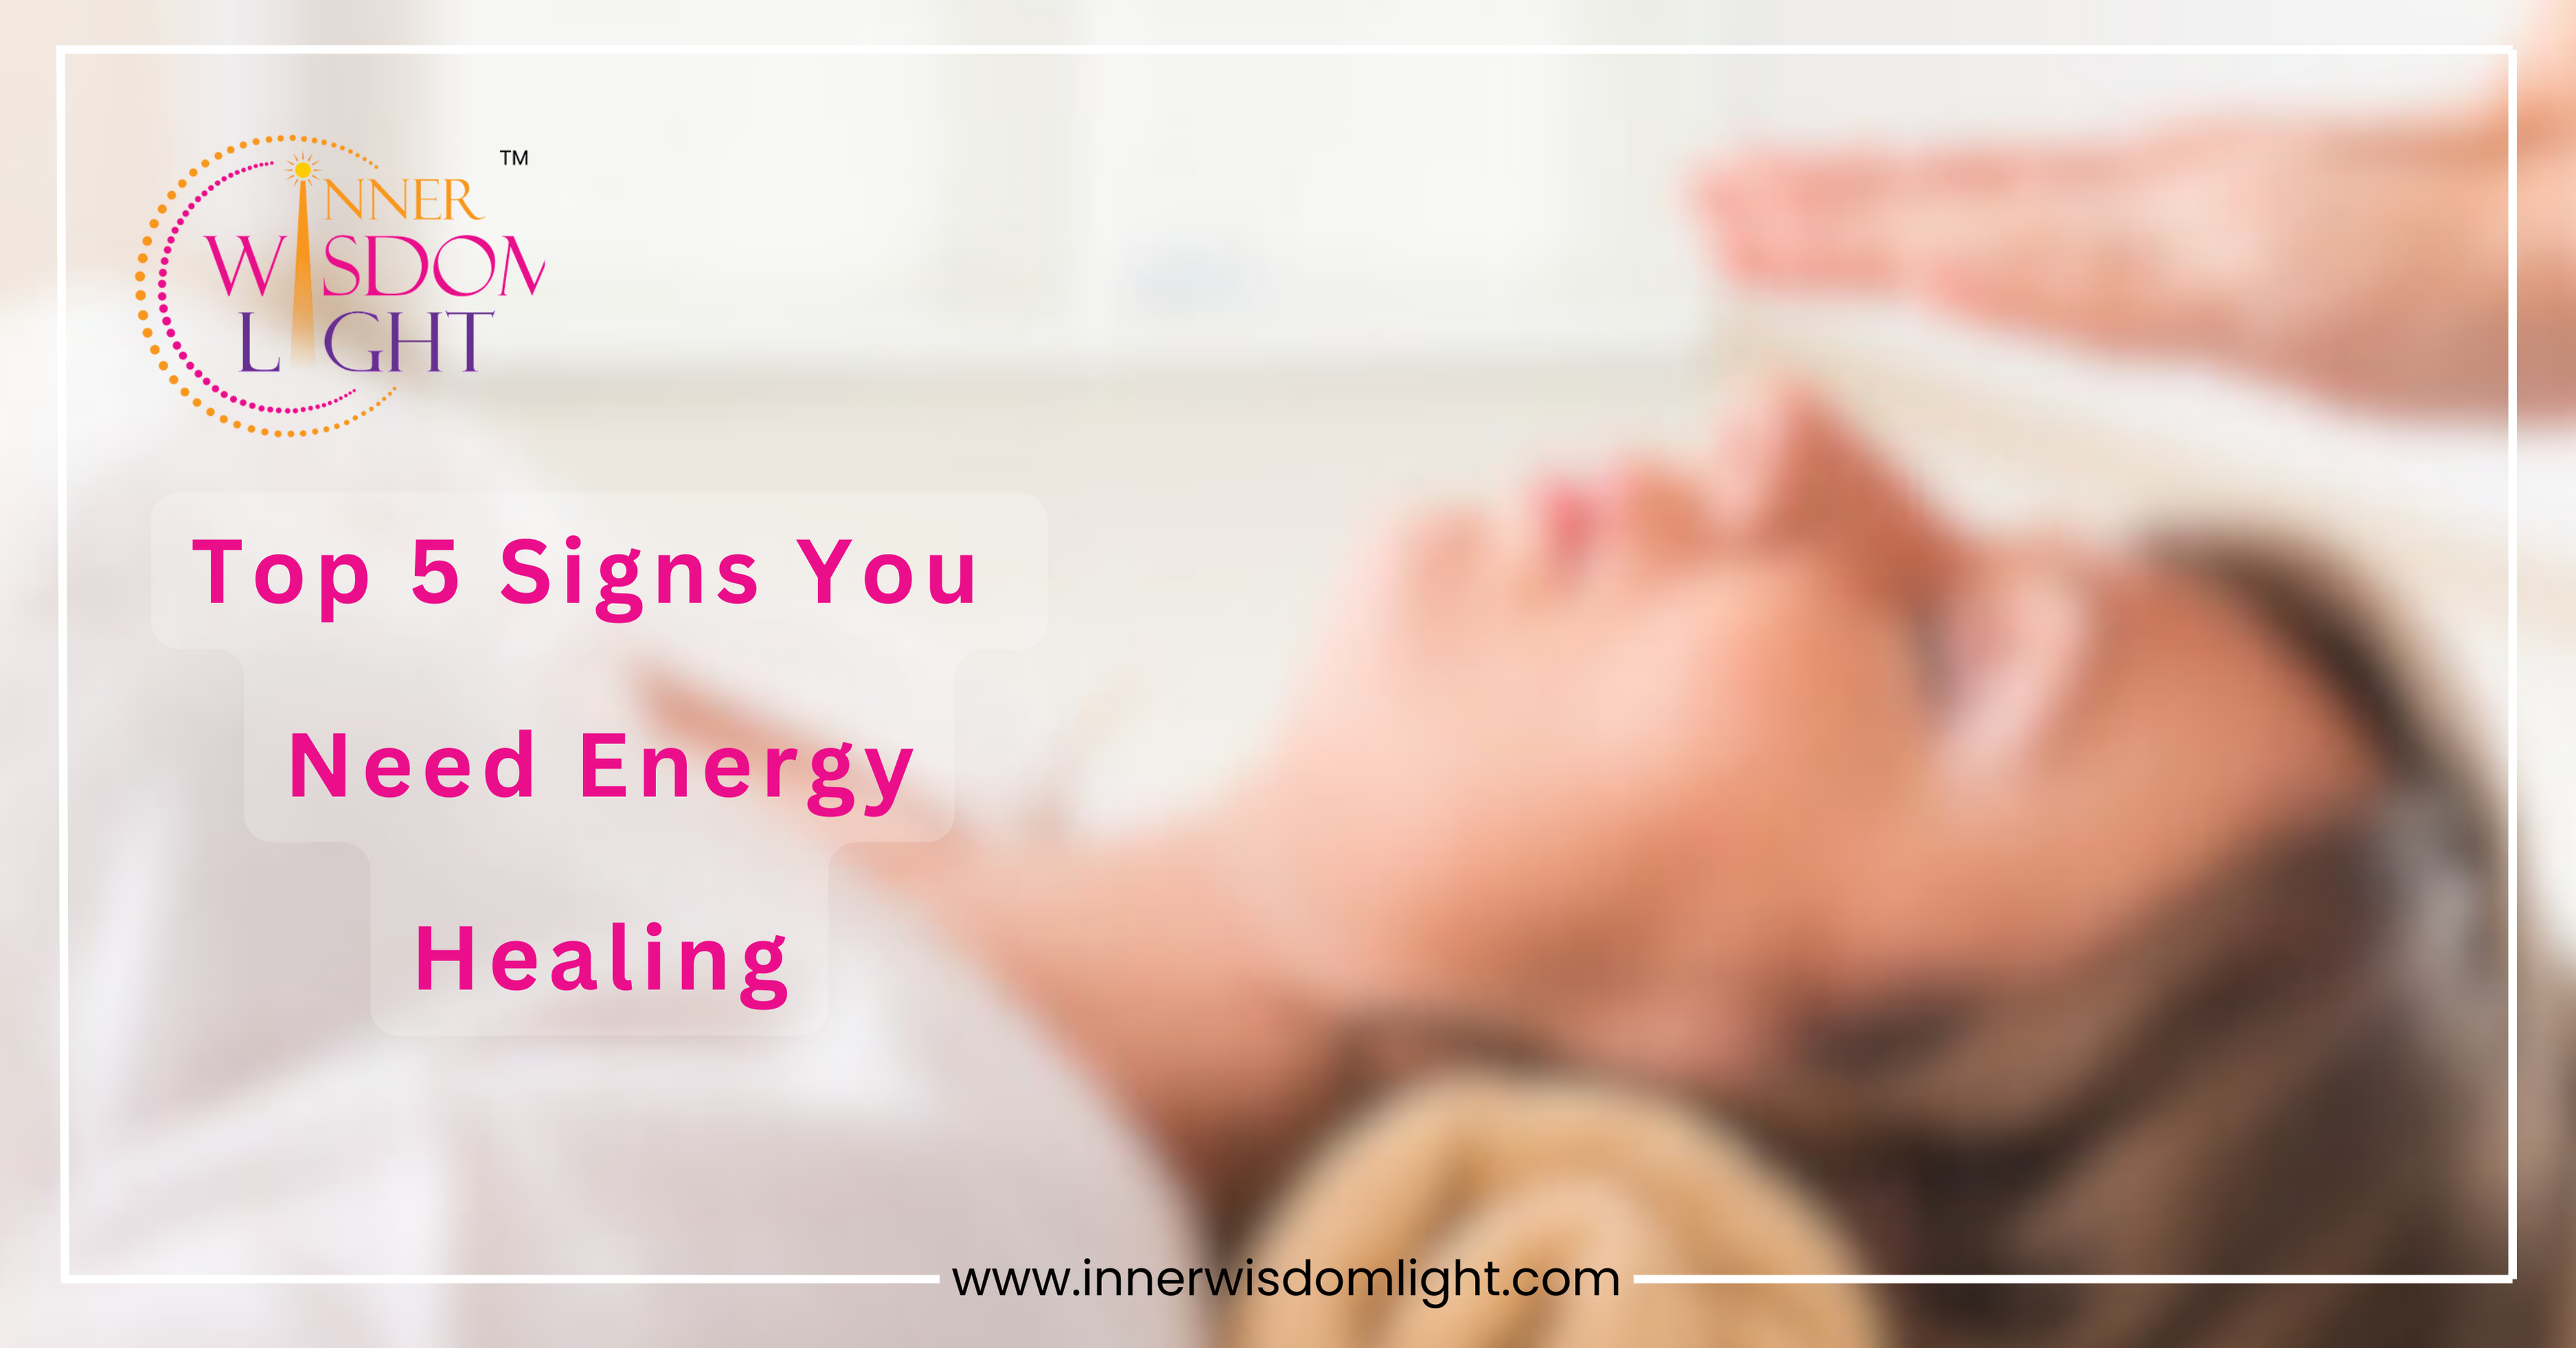 Inner Wisdom Light website logo with the text '5 Signs You Need Energy Healing' in the middle and in the background a woman lying down with a pair of hands visible above her head